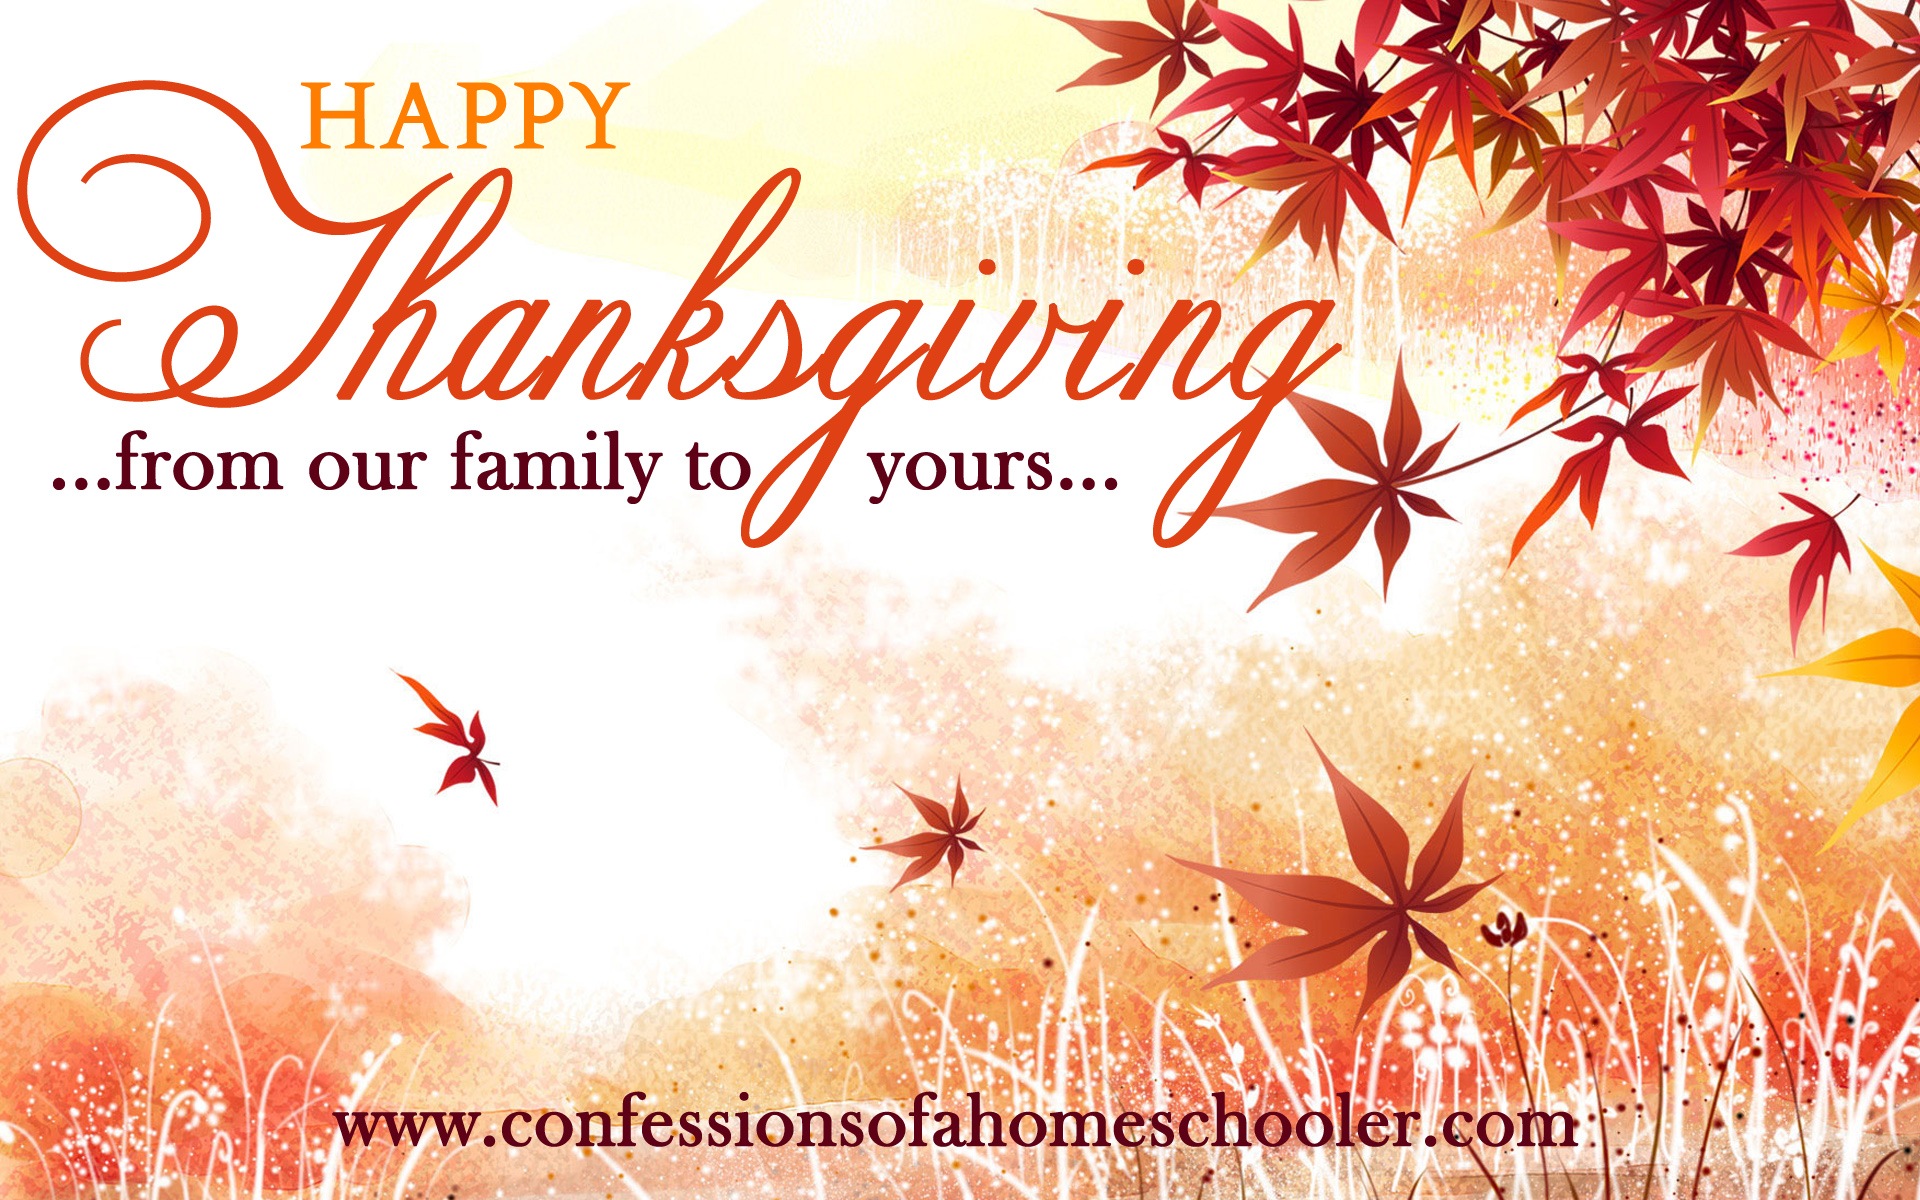 Happy Thanksgiving 2013! | Confessions of a Homeschooler